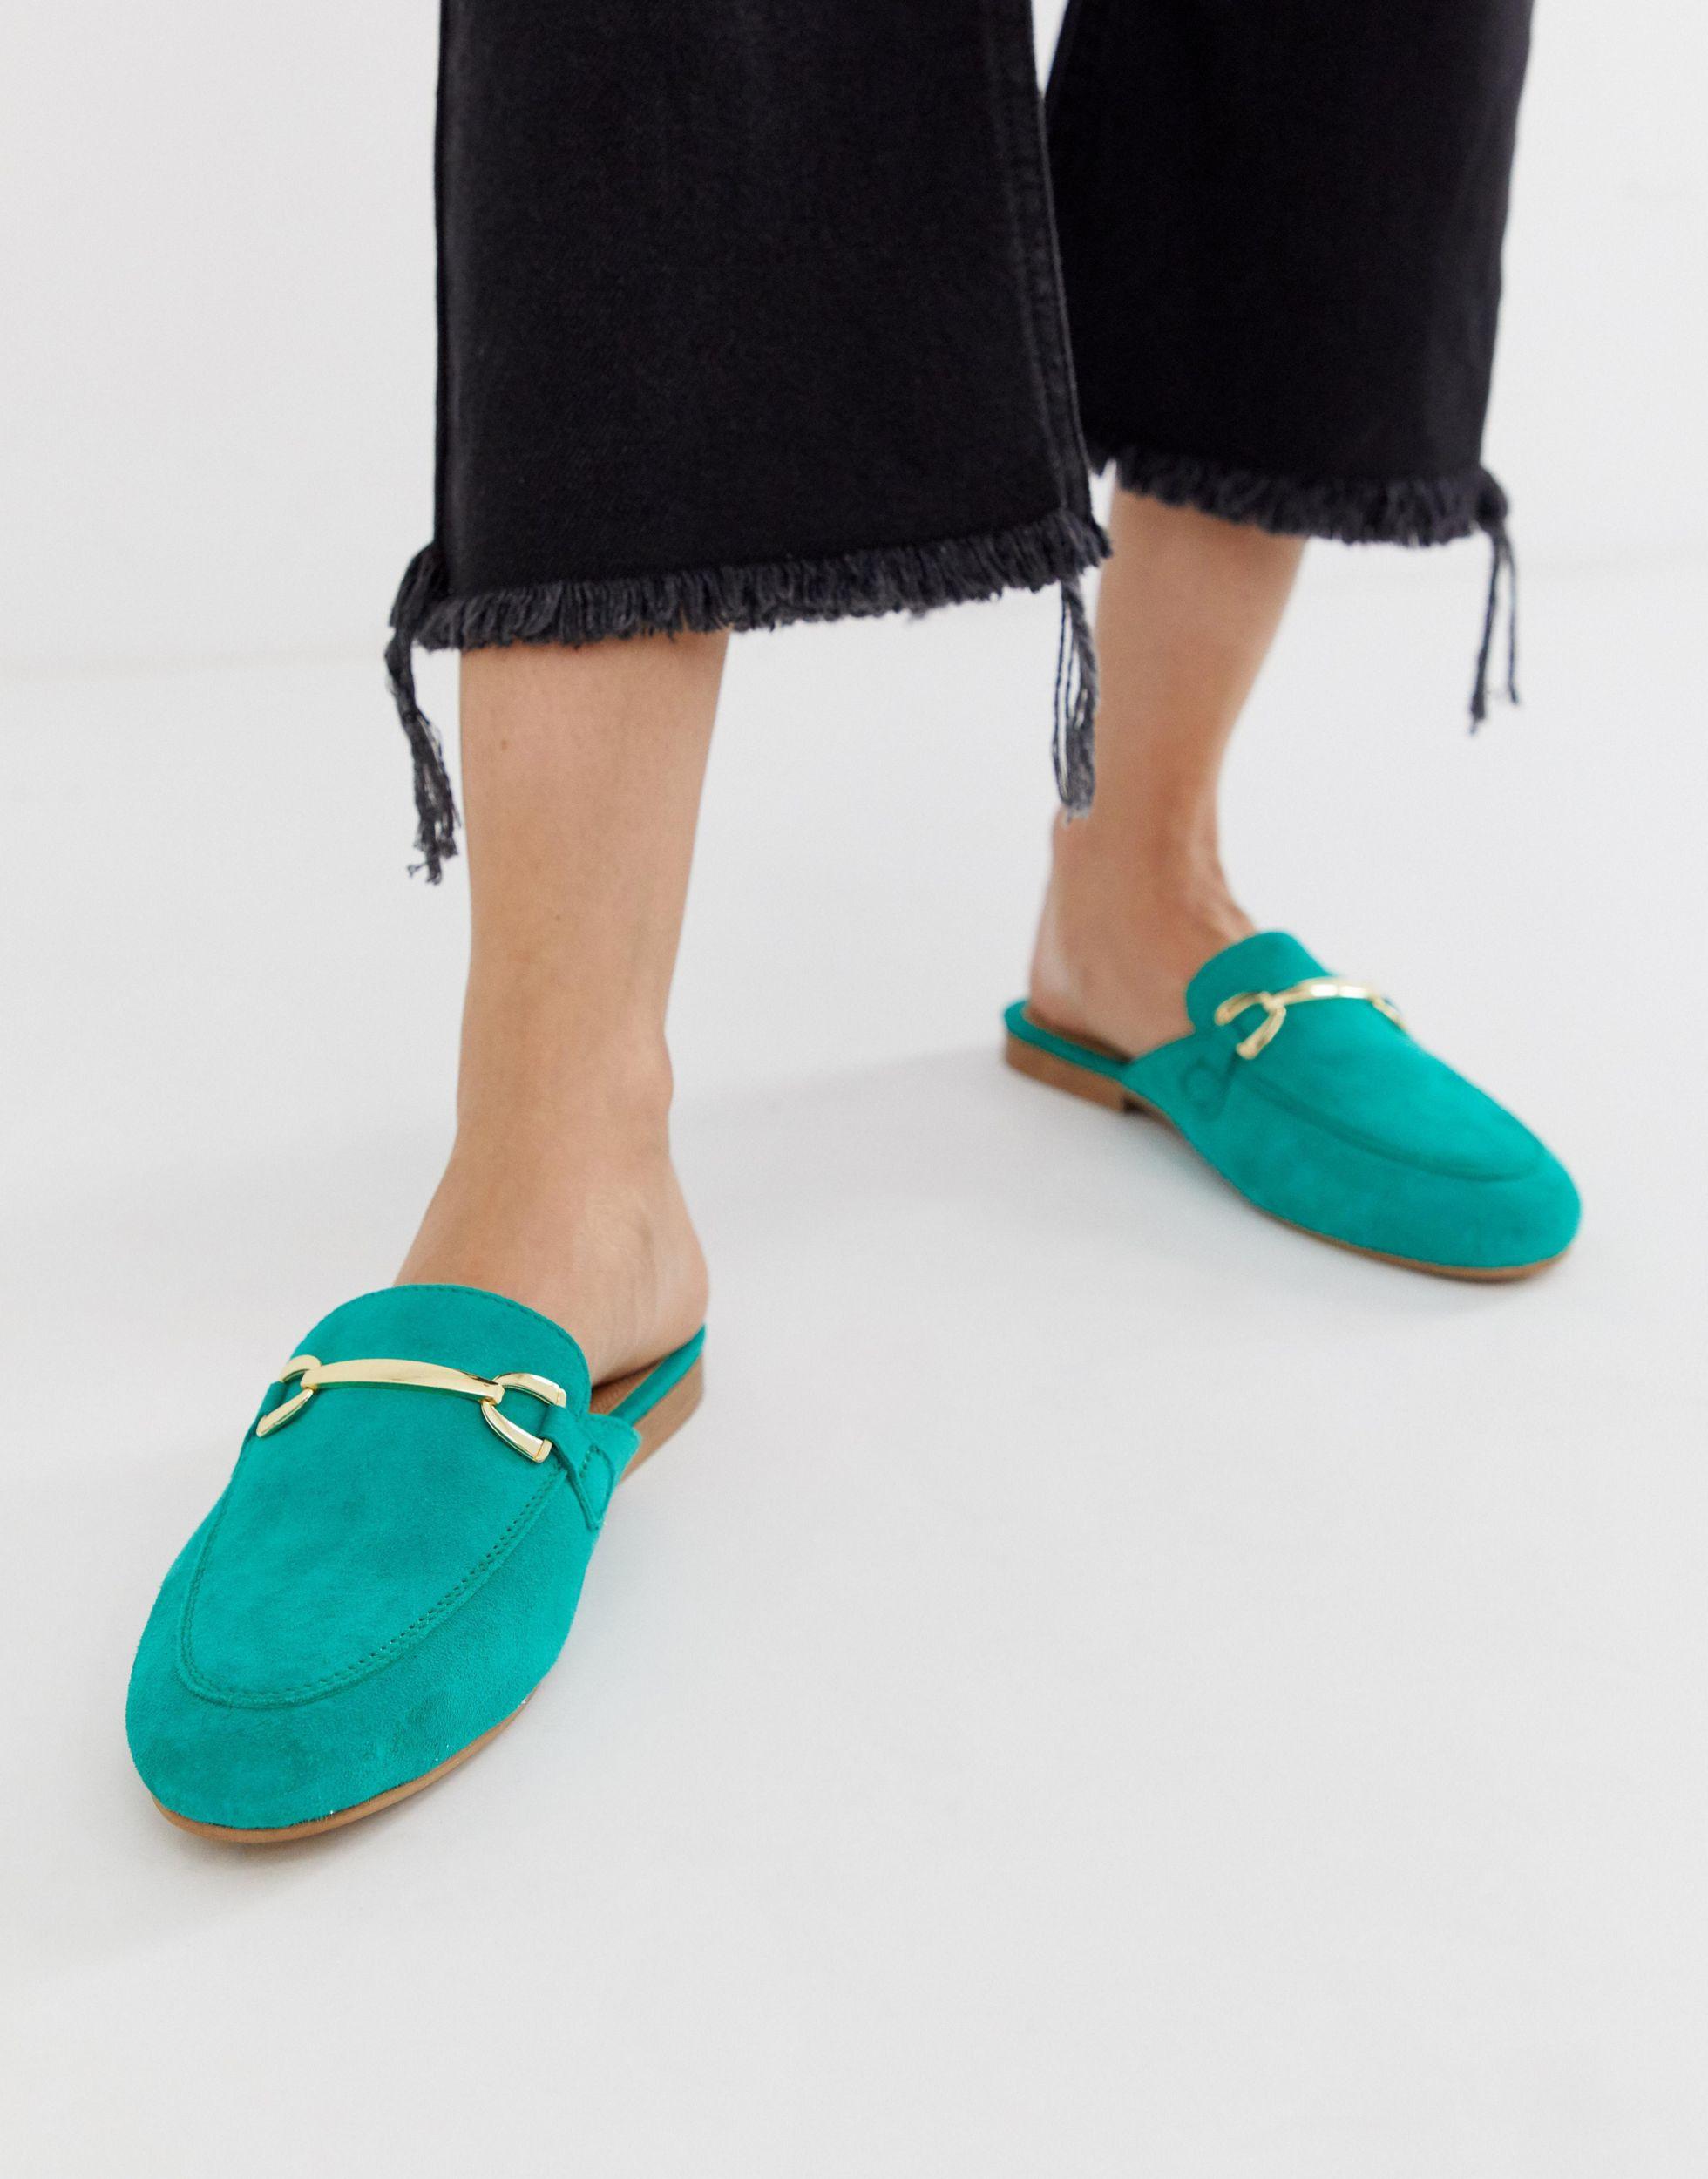 suede mule loafers